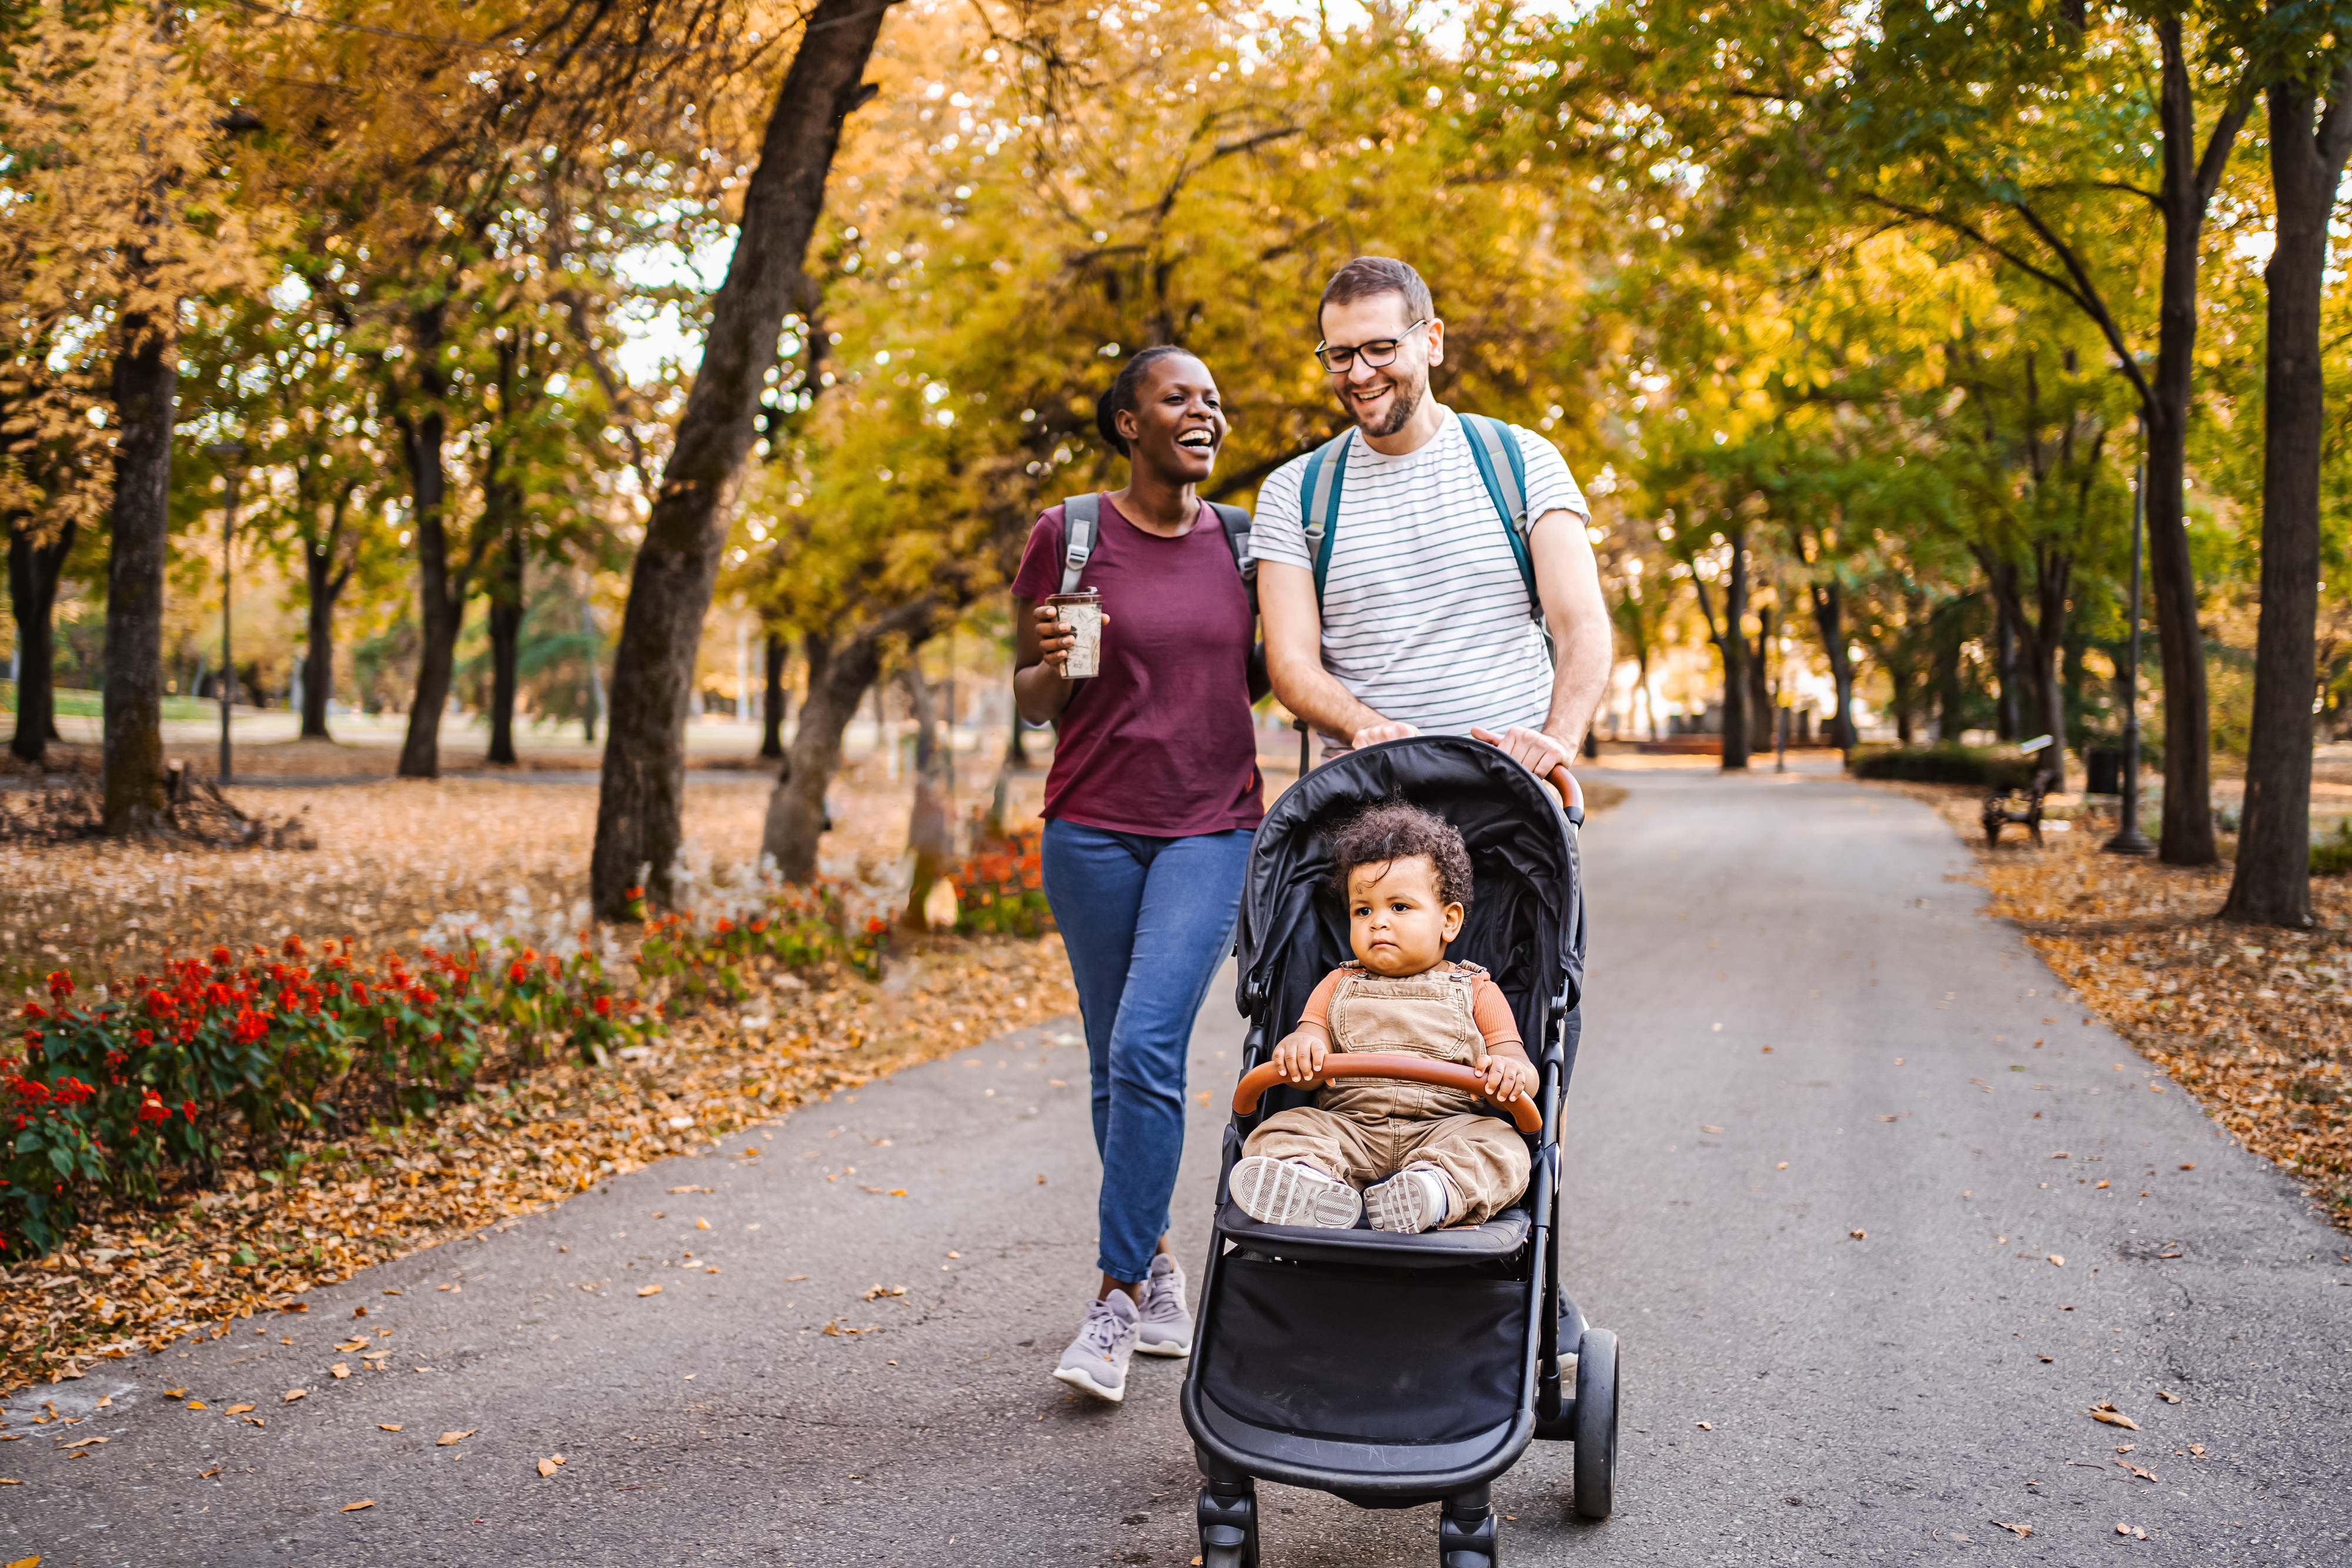 Two adults smiling and walking with a baby in a stroller through a park with trees